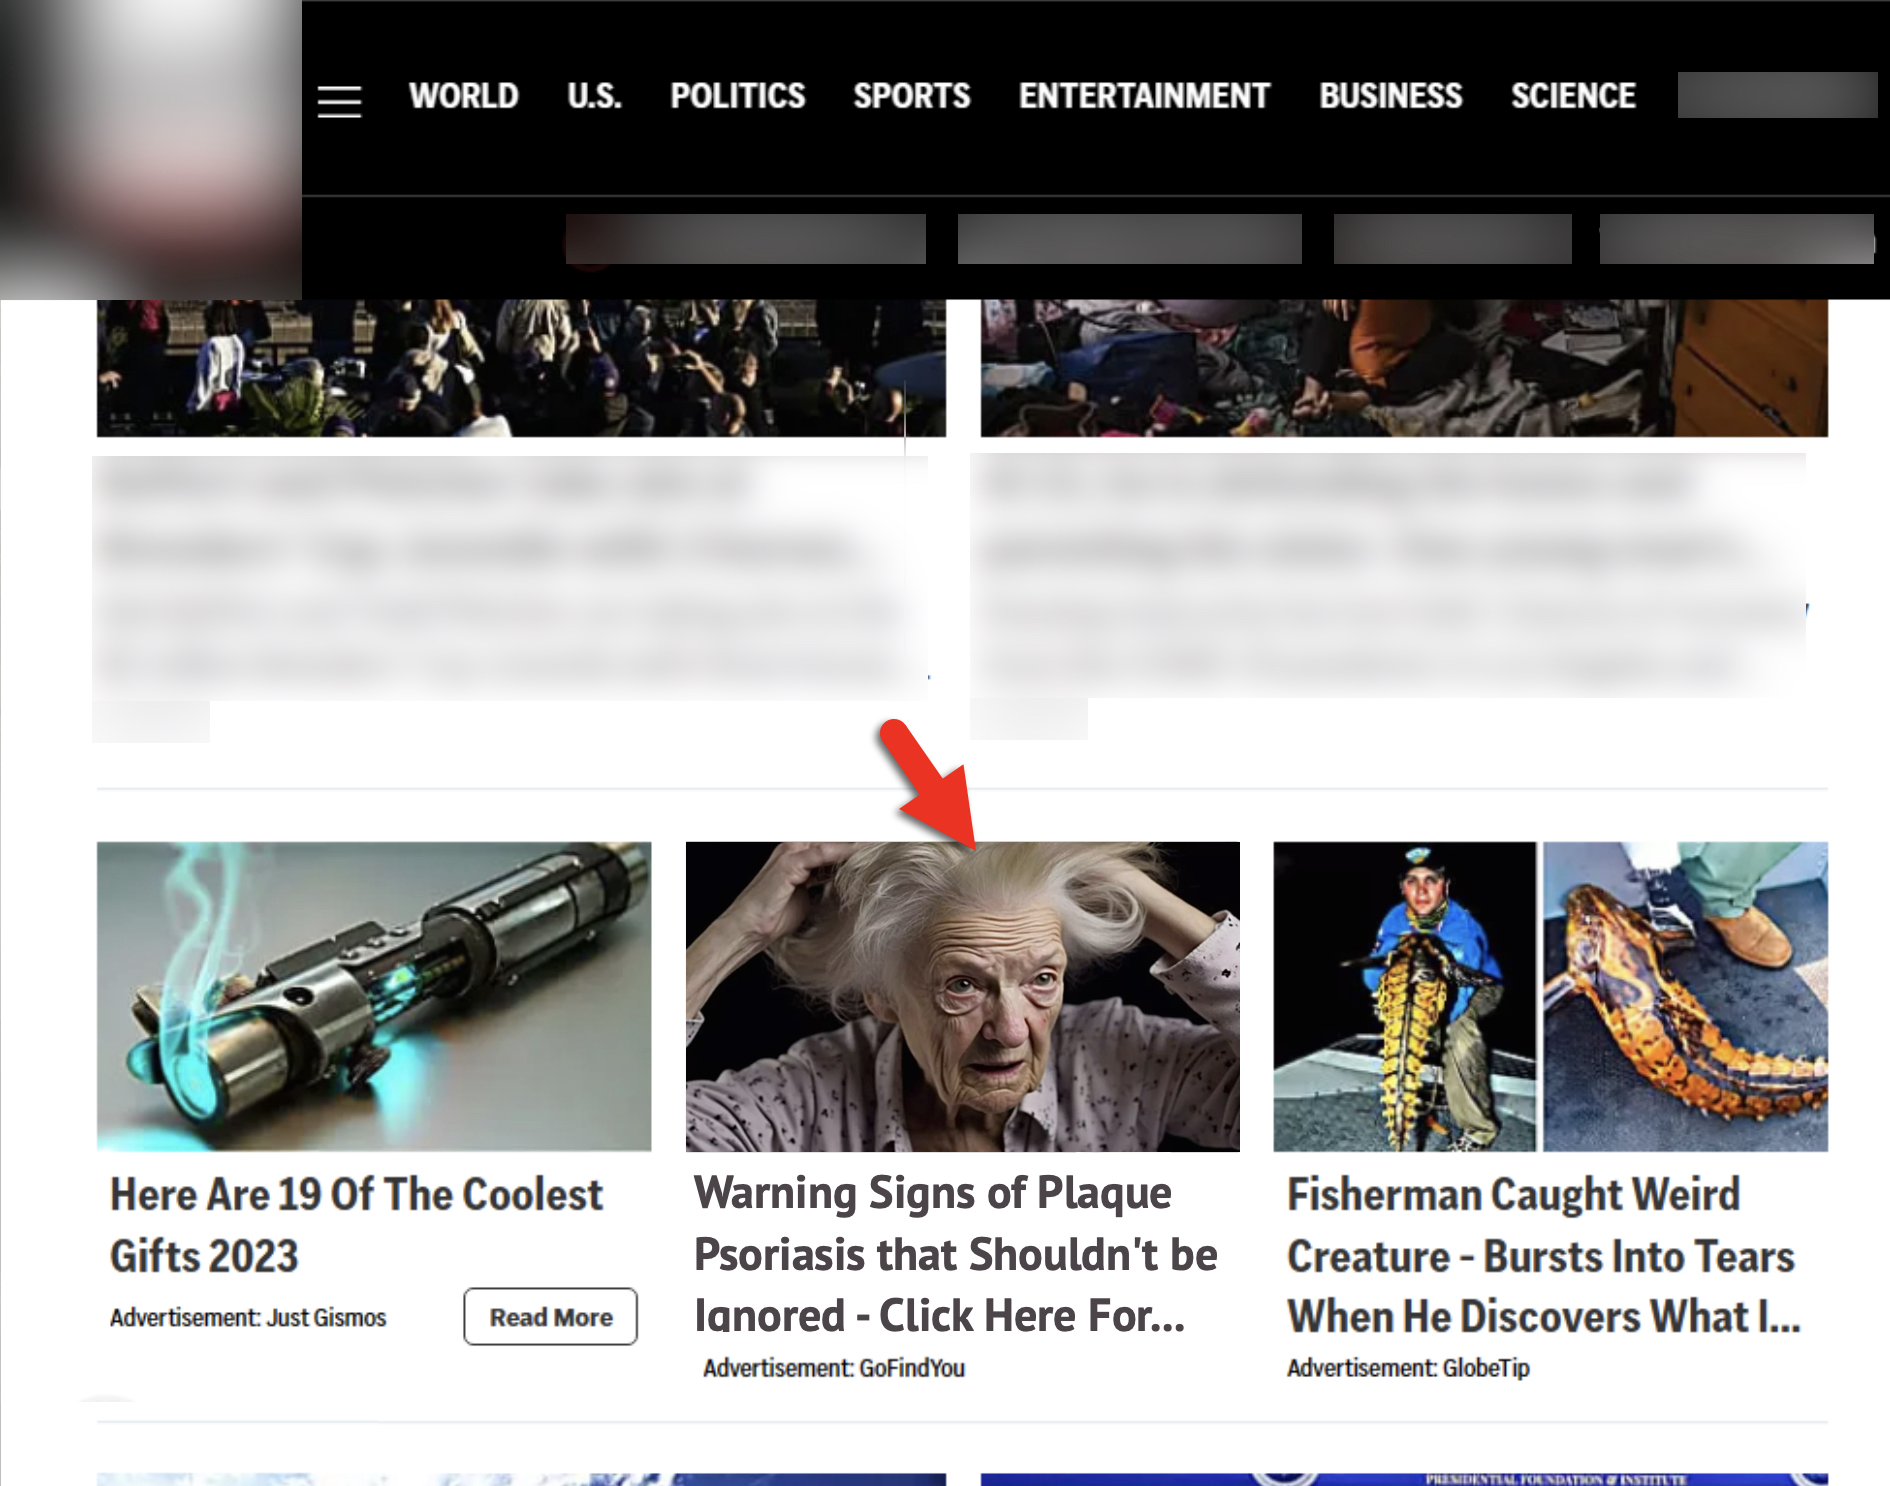 Image 3 is a screenshot of a site with native ads. A red arrow points to an AI generated image of an elderly woman clutching her head. Below is the title of the advertisement: Warning signs of plaque psoriasis that shouldn't be ignored, click here for… Some of the information is redacted. 